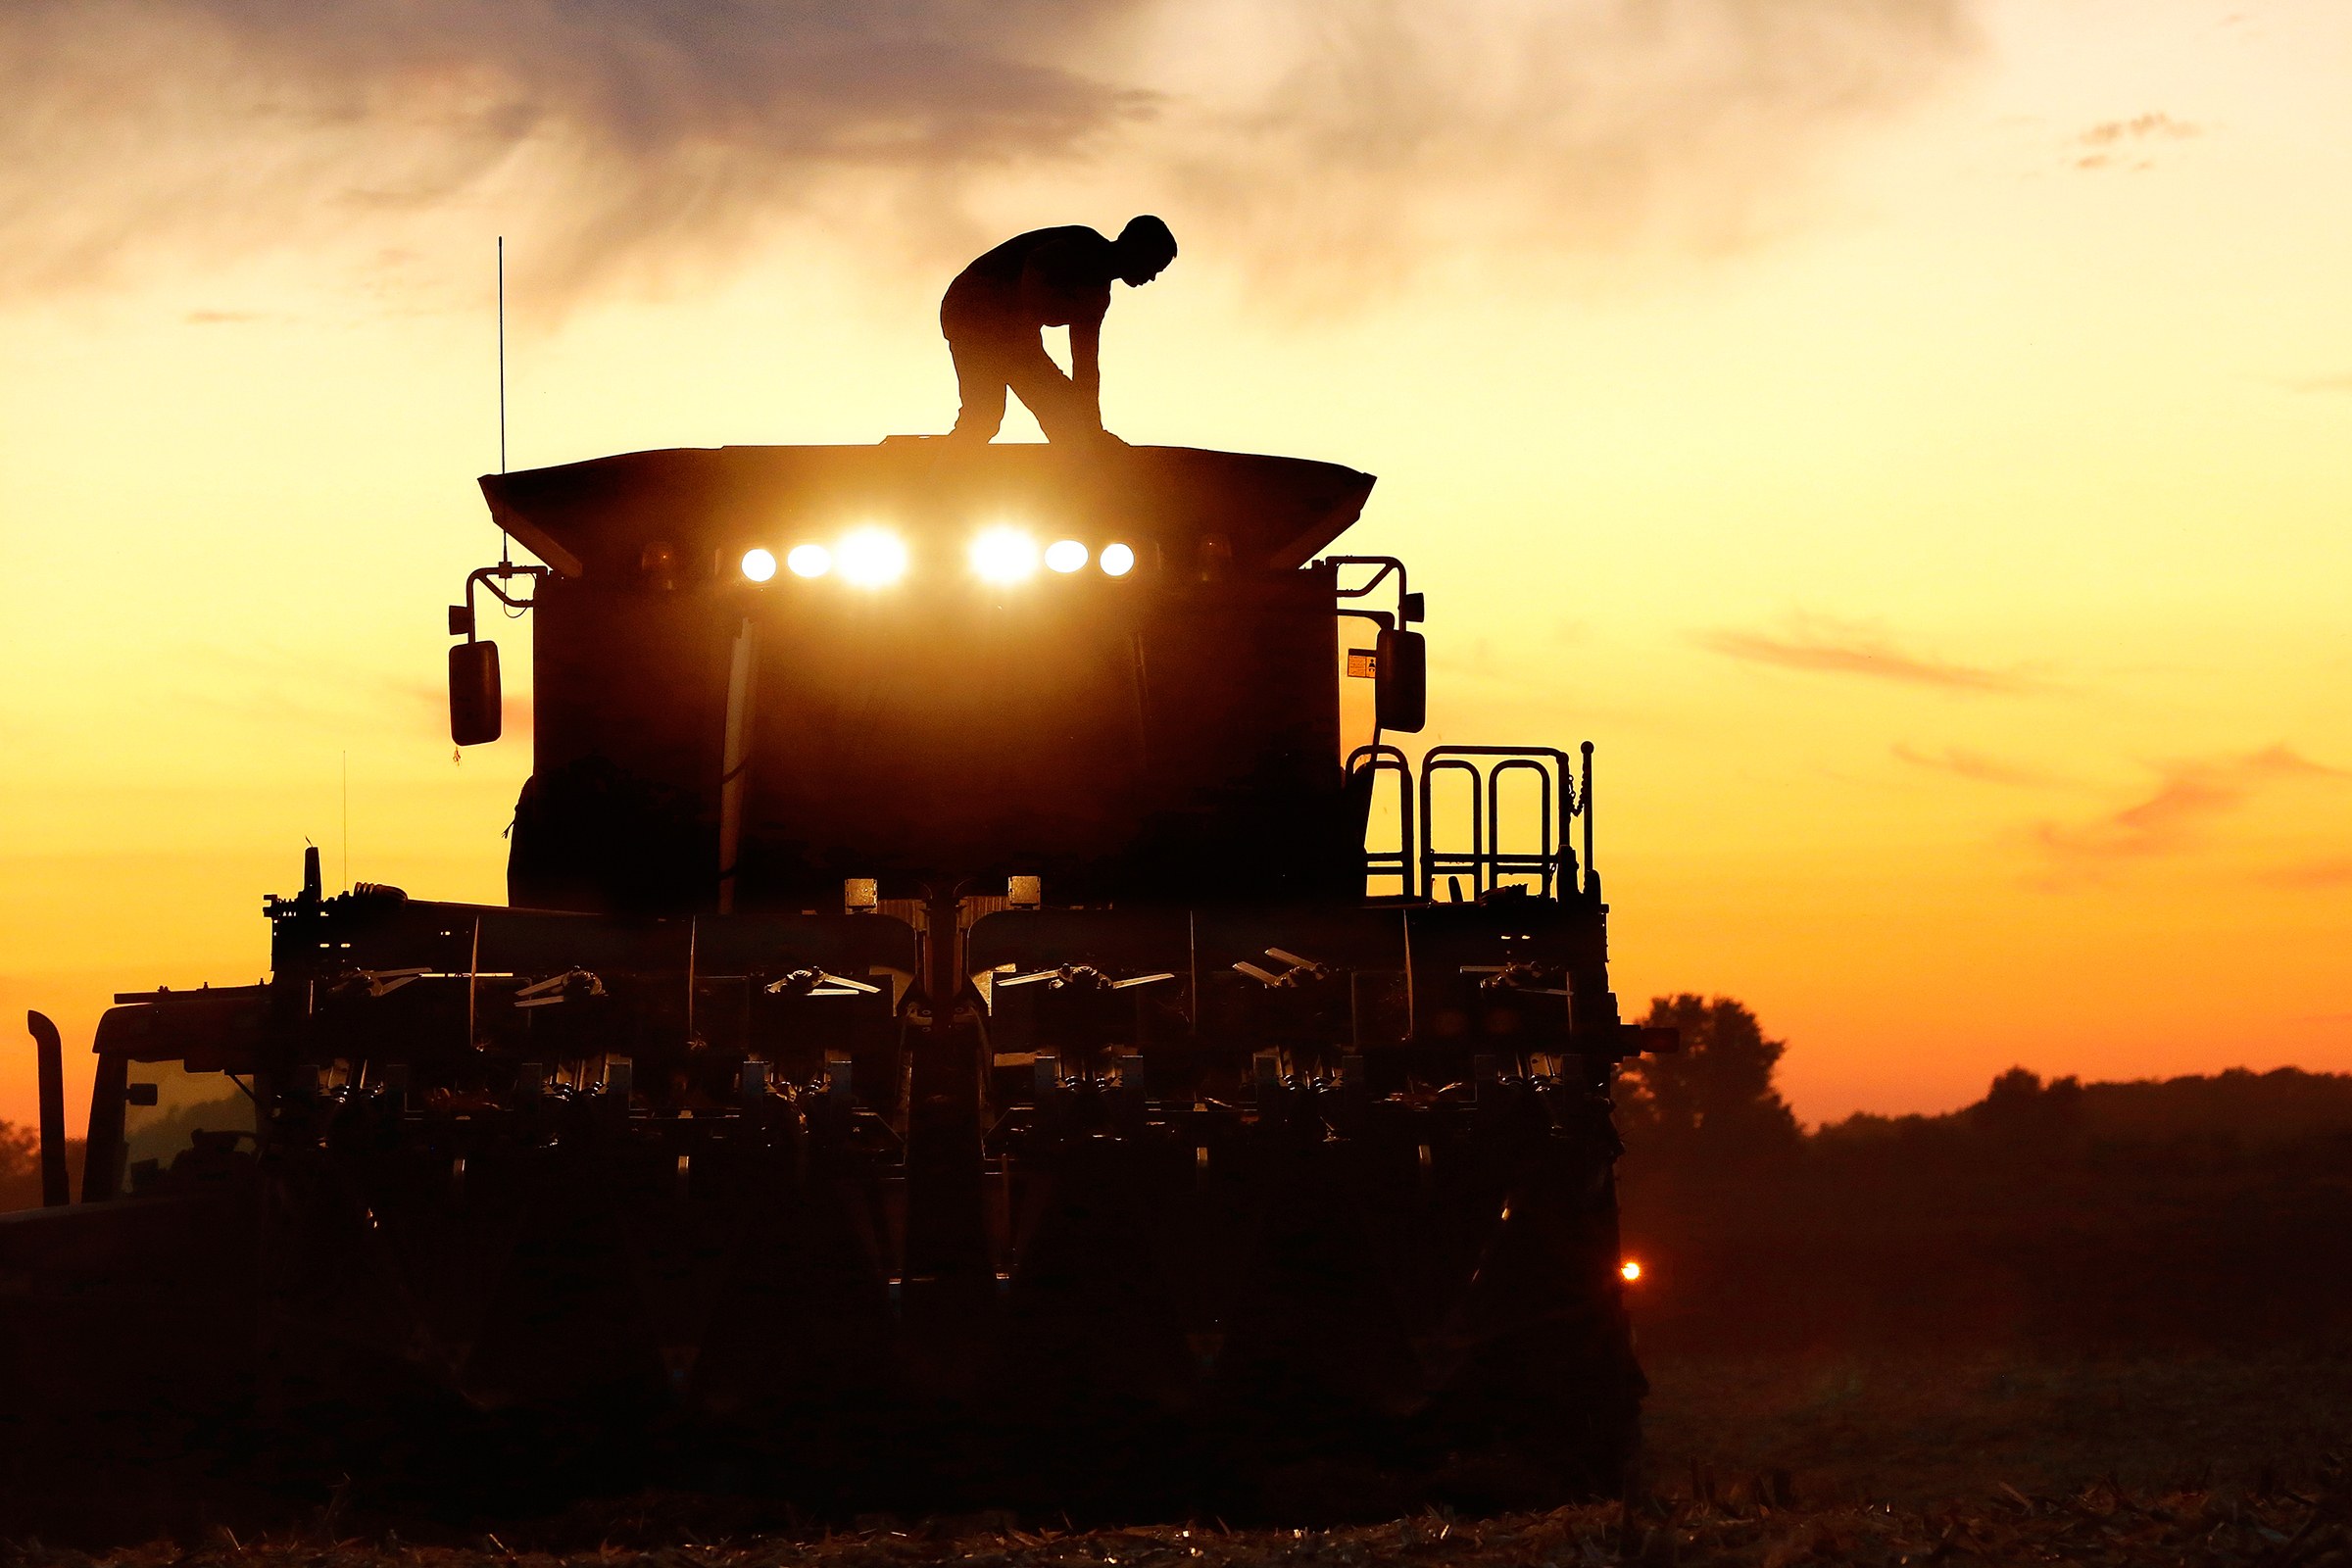 New High Tech Farm Equipment Is A Nightmare For Farmers Wired